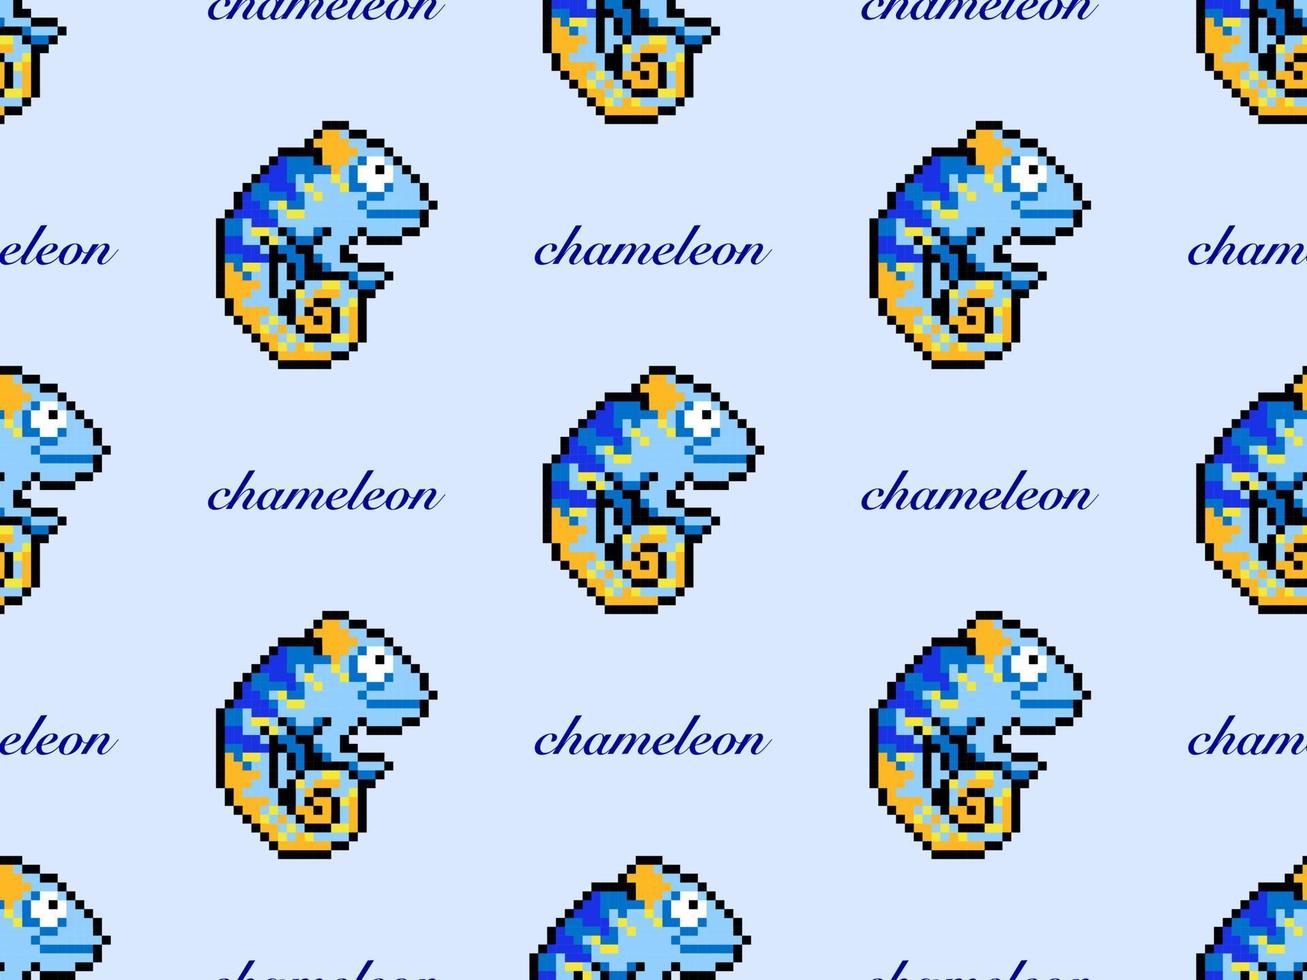 Chameleon cartoon character seamless pattern on blue background.Pixel style vector